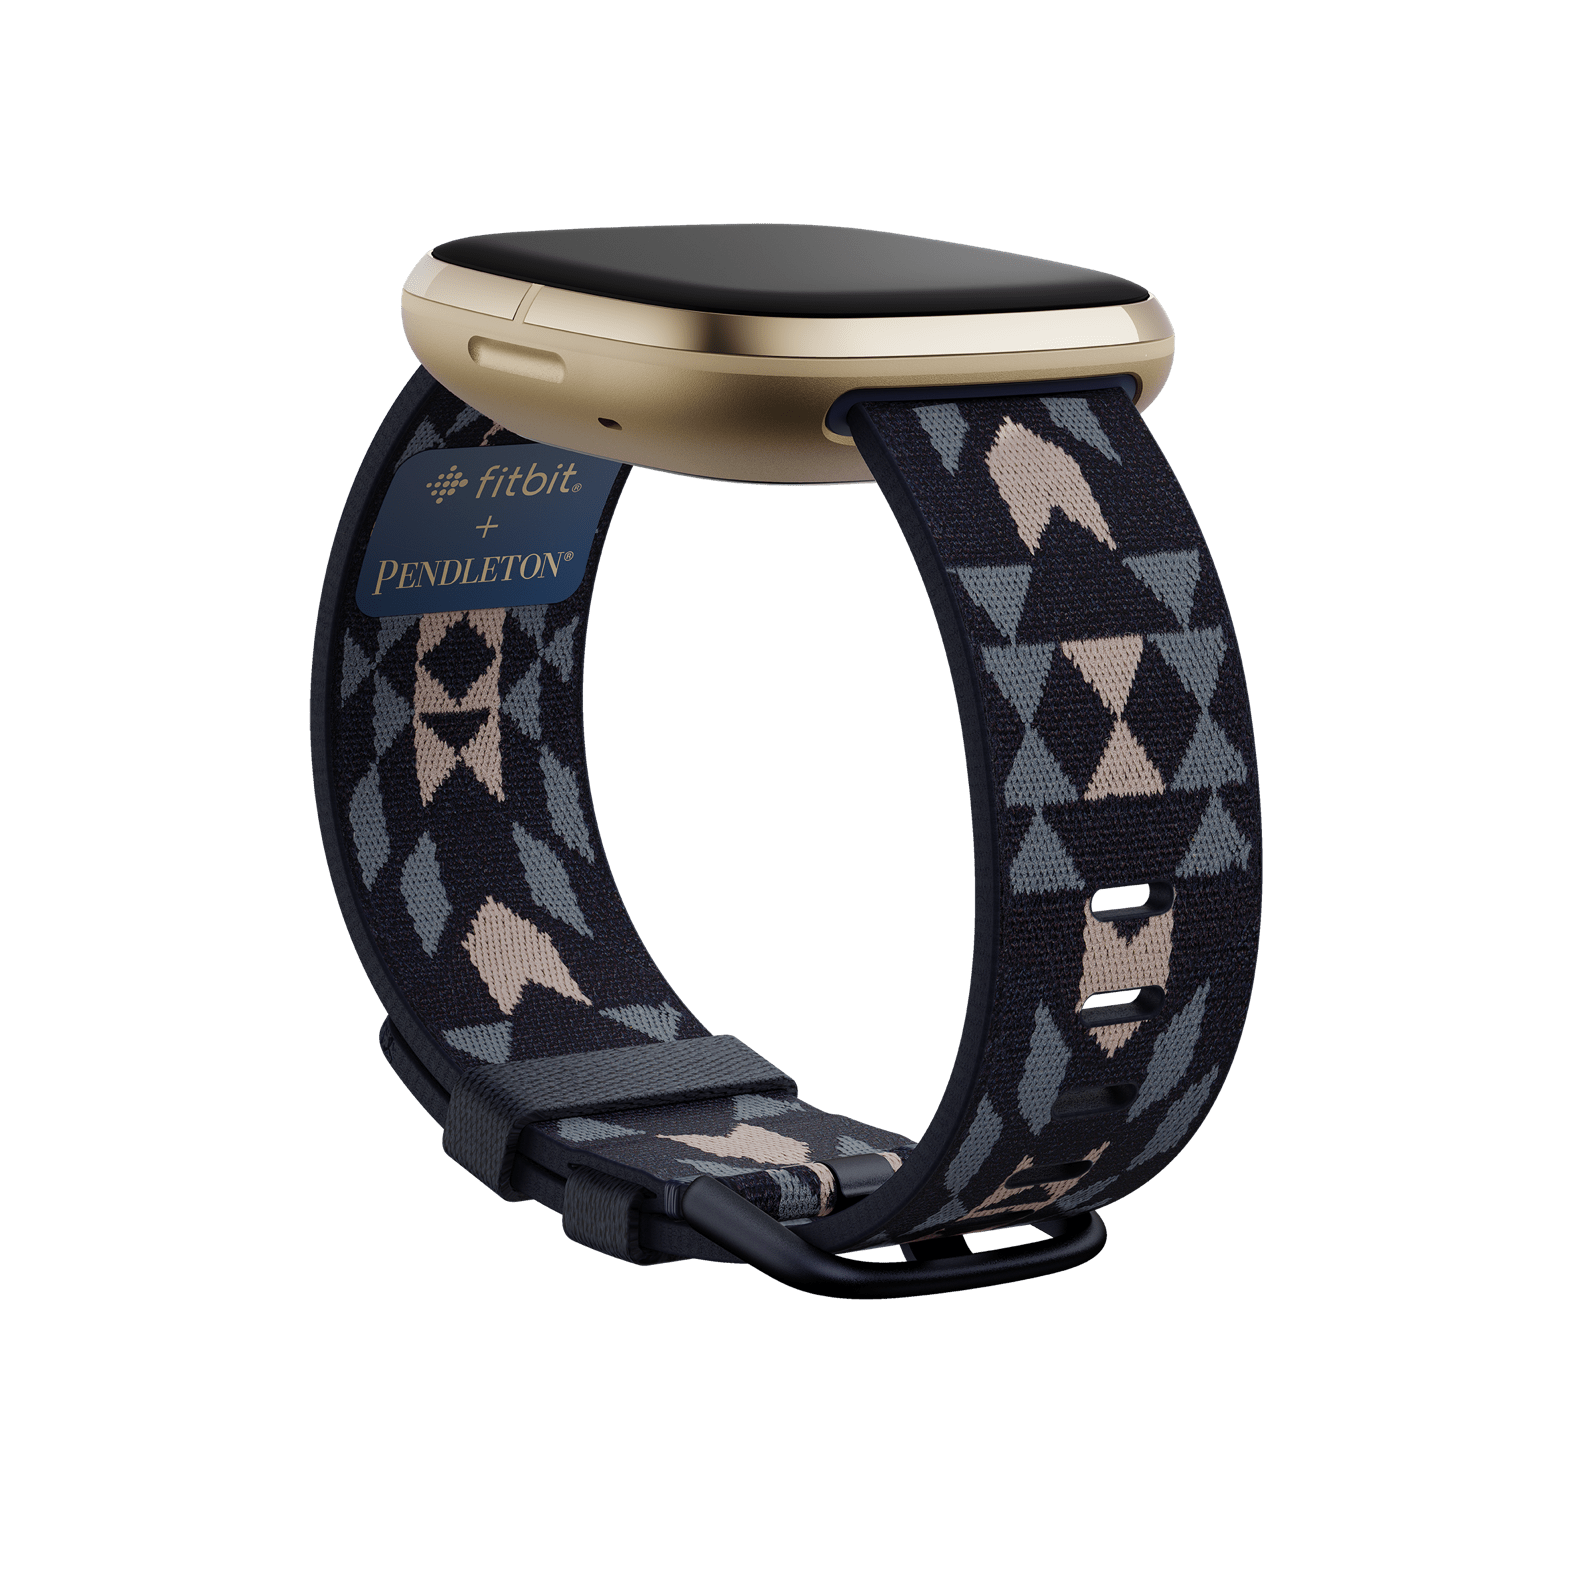 Pendleton for Fitbit Woven Bands | Shop 